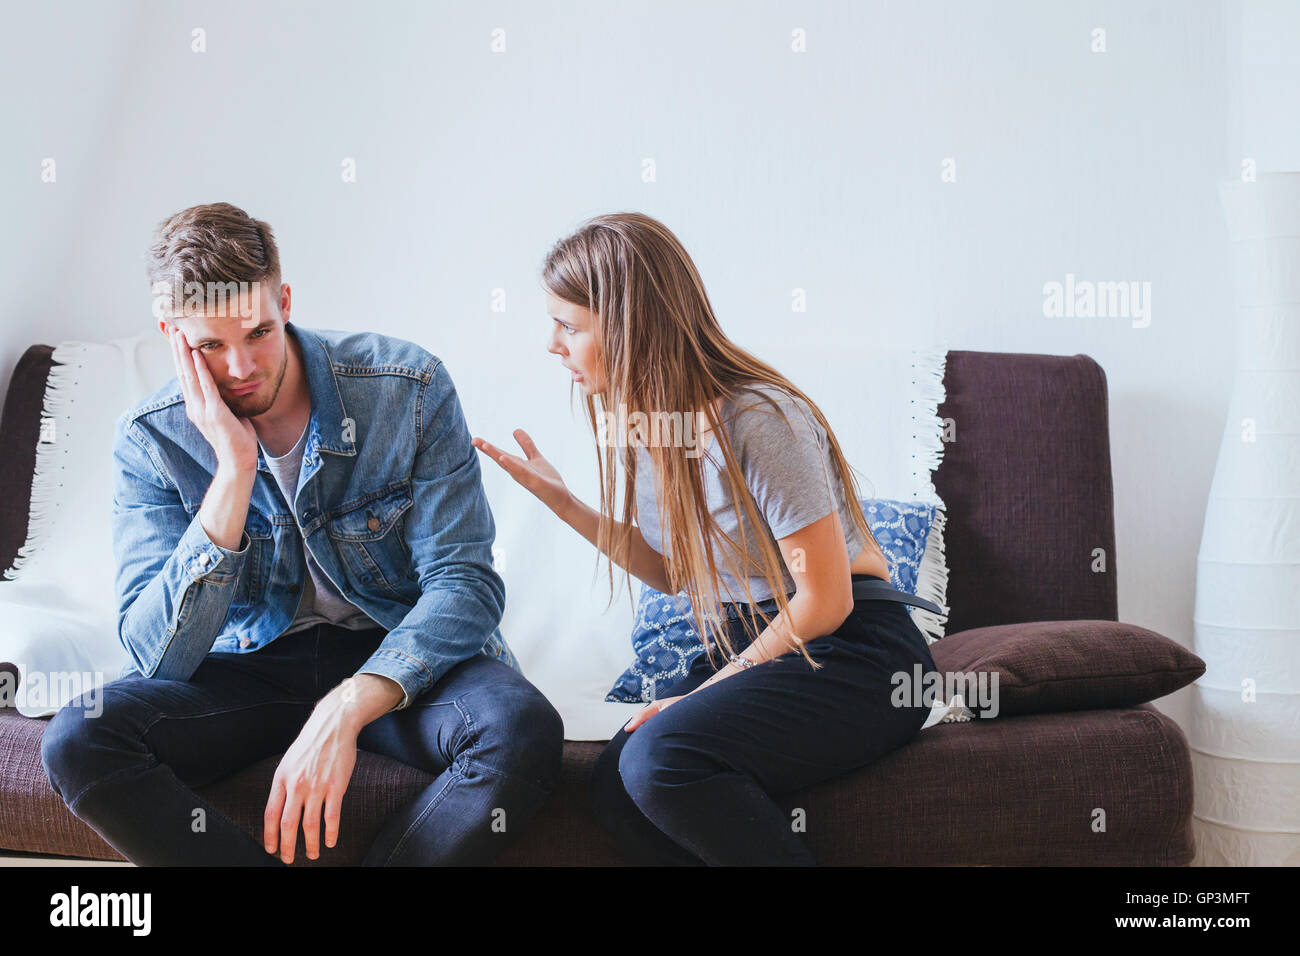 relationship problems in young family, angry woman wife and tired indifferent man husband Stock Photo